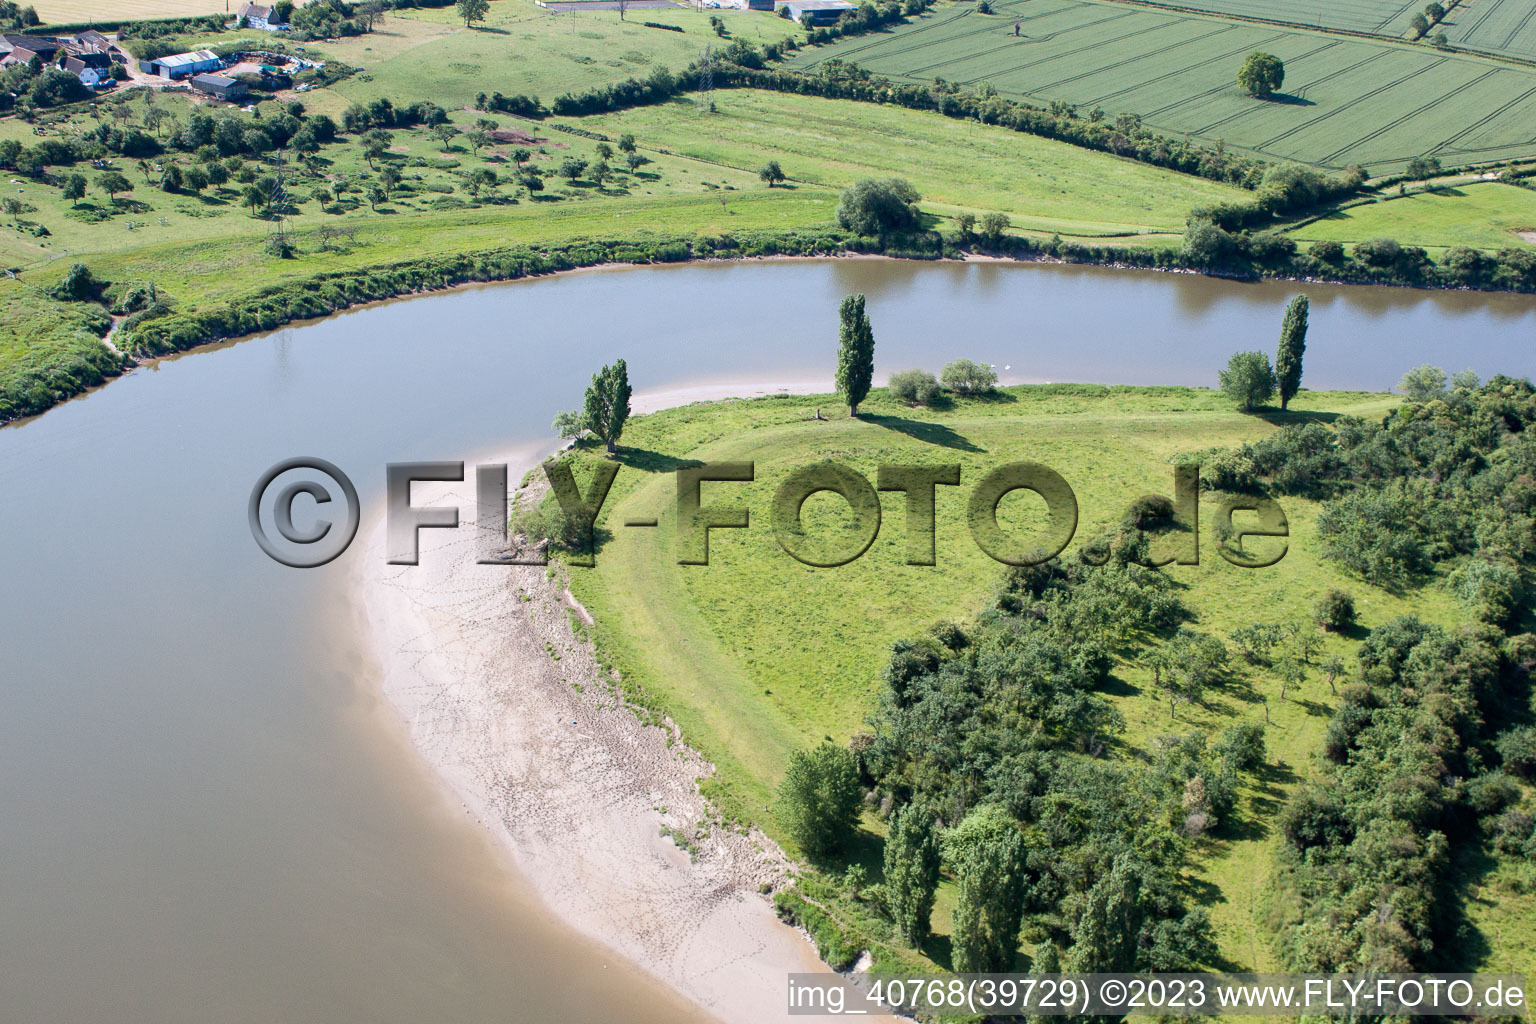 Aerial photograpy of Knee of the River Severn near Oakle Street in Oakle Street in the state England, Great Britain